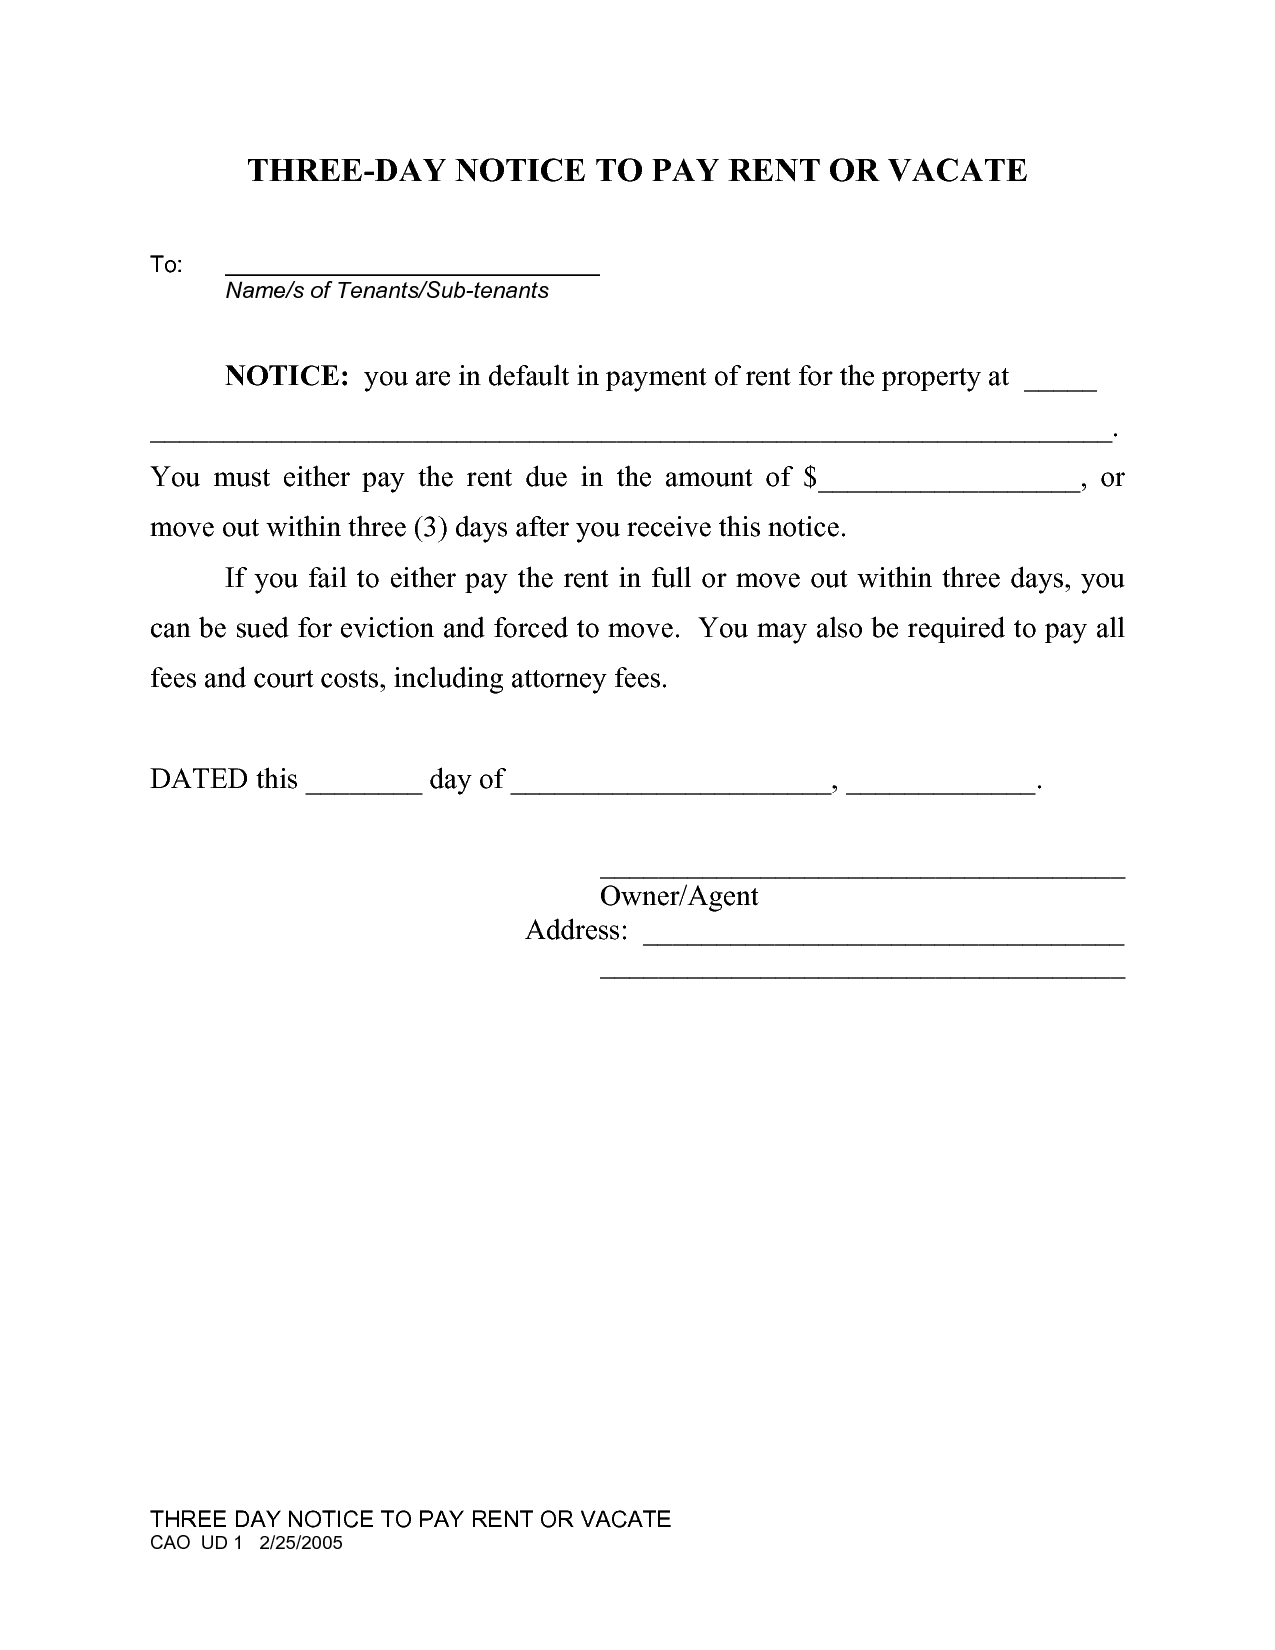 free-printable-3-day-eviction-notice-printable-free-templates-download